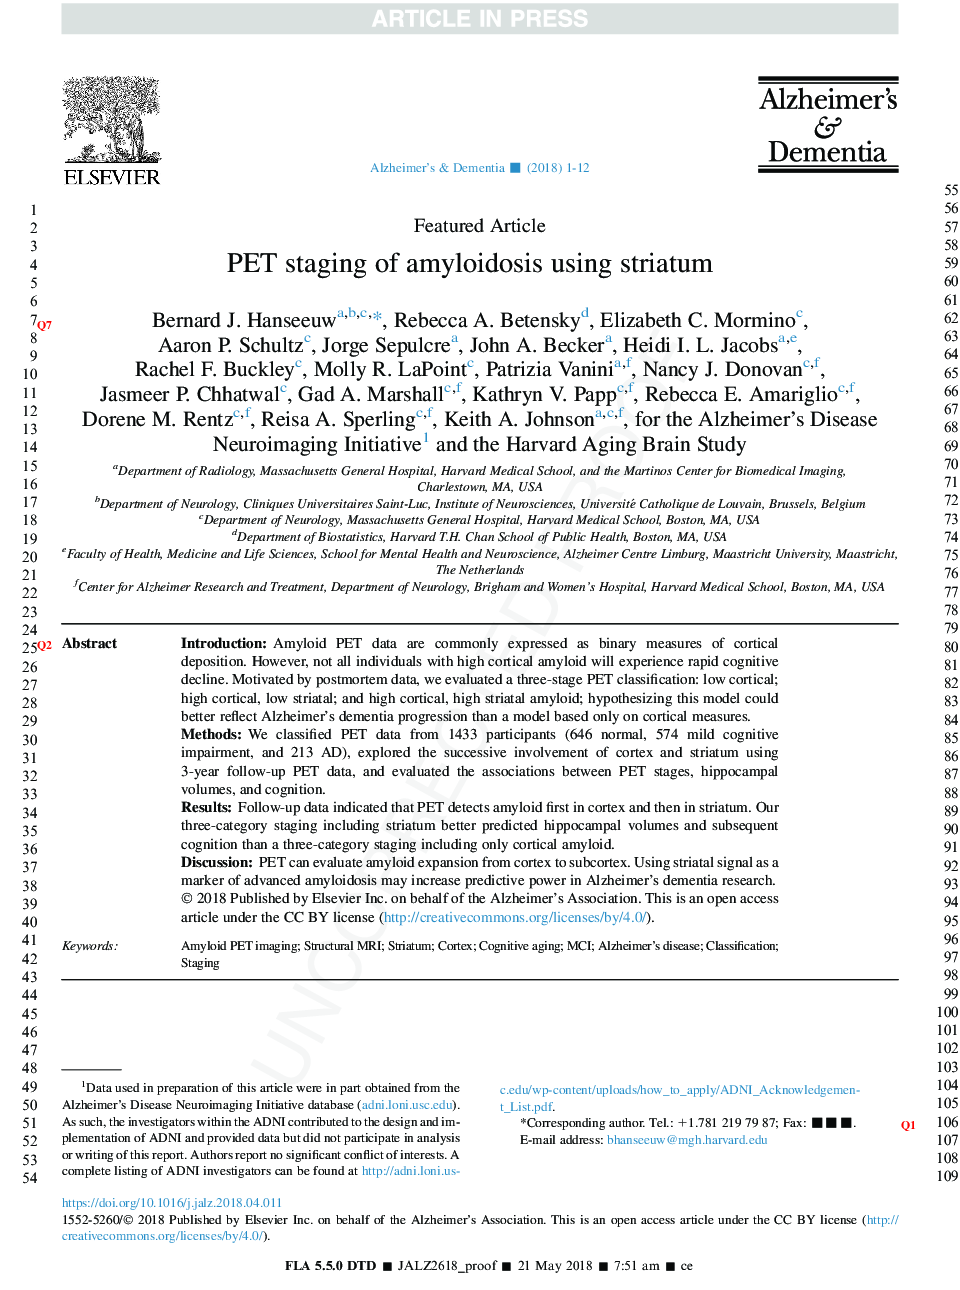 PET staging of amyloidosis using striatum